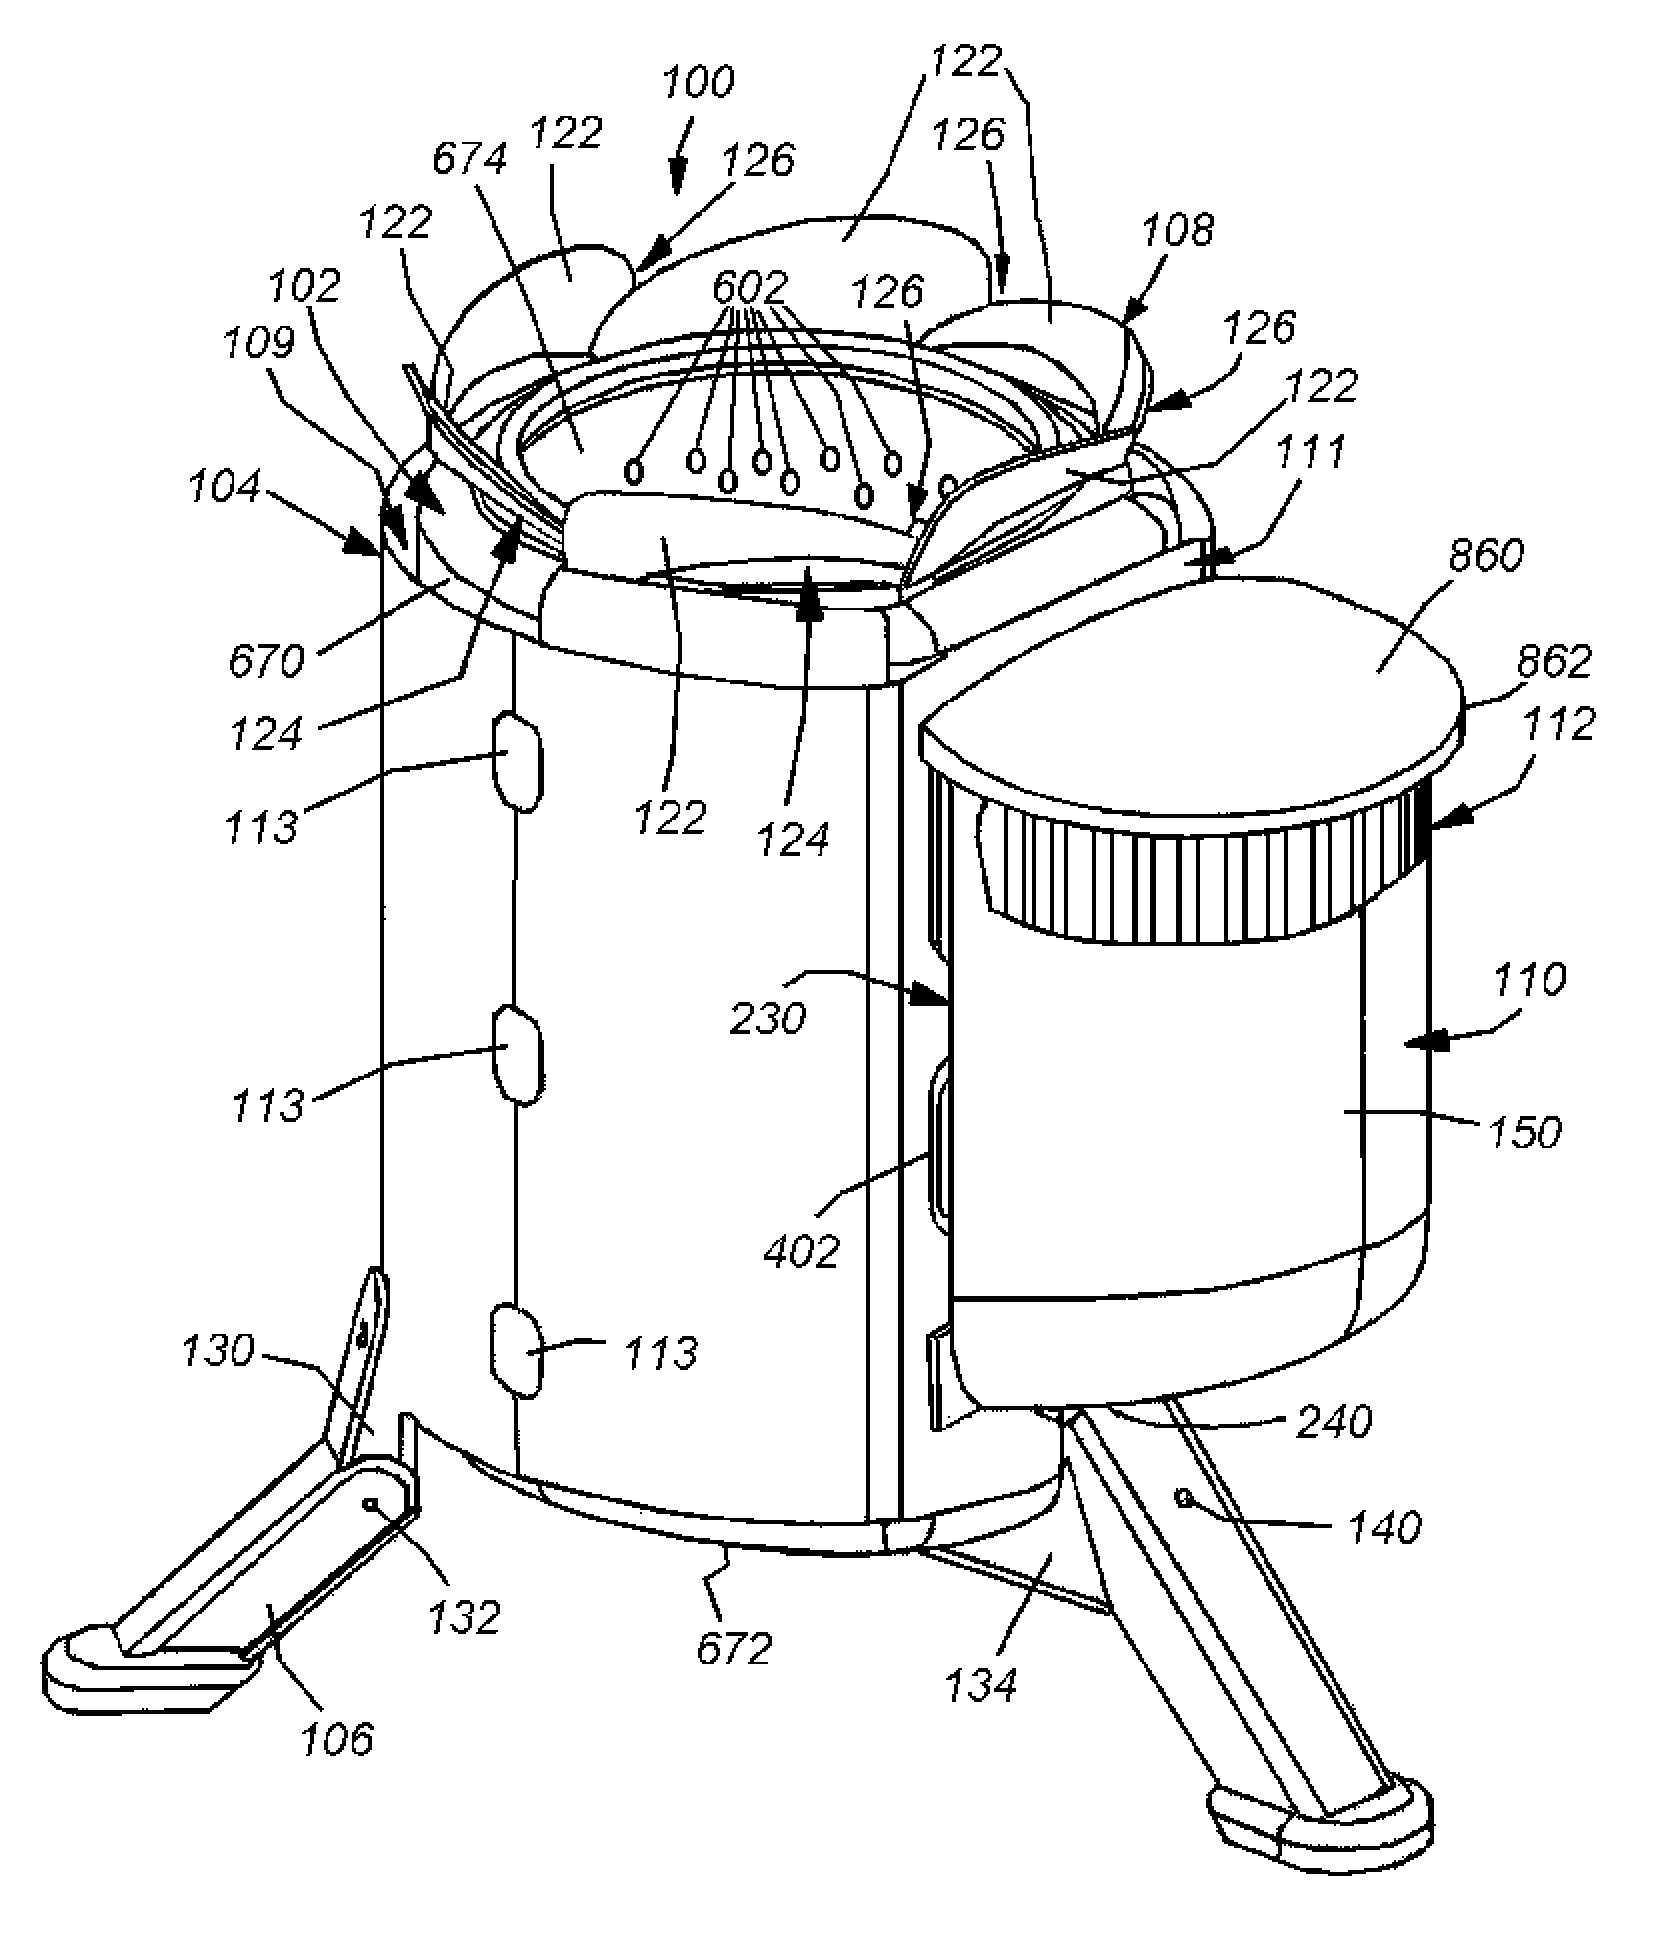 Portable combustion device utilizing thermoelectrical generation